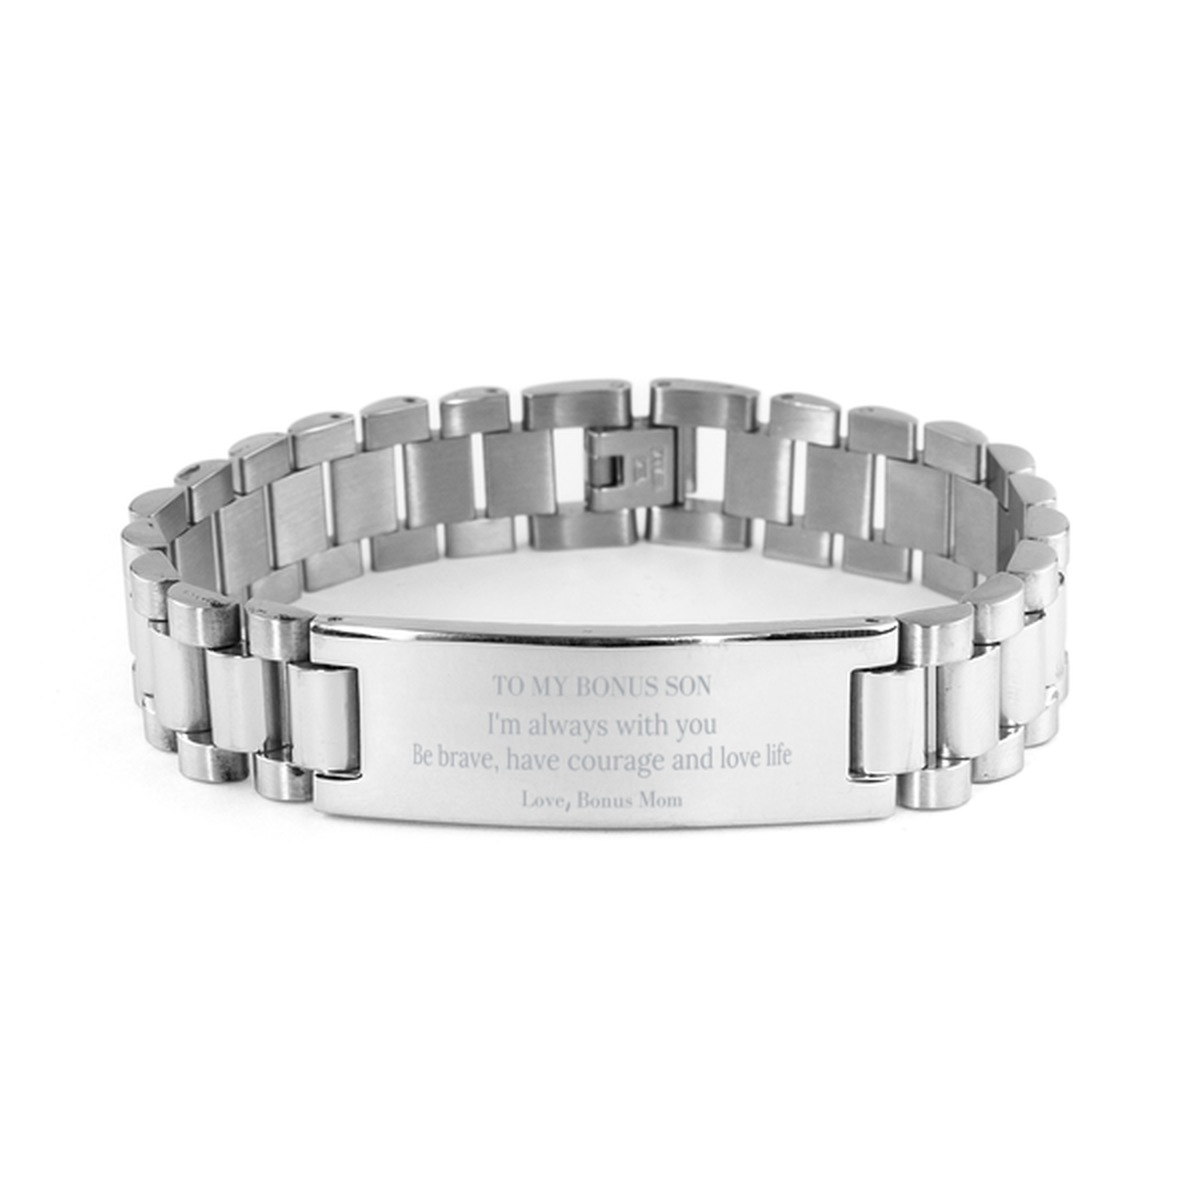 To My Bonus Son Gifts from Bonus Mom, Unique Ladder Stainless Steel Bracelet Inspirational Christmas Birthday Graduation Gifts for Bonus Son I'm always with you. Be brave, have courage and love life. Love, Bonus Mom